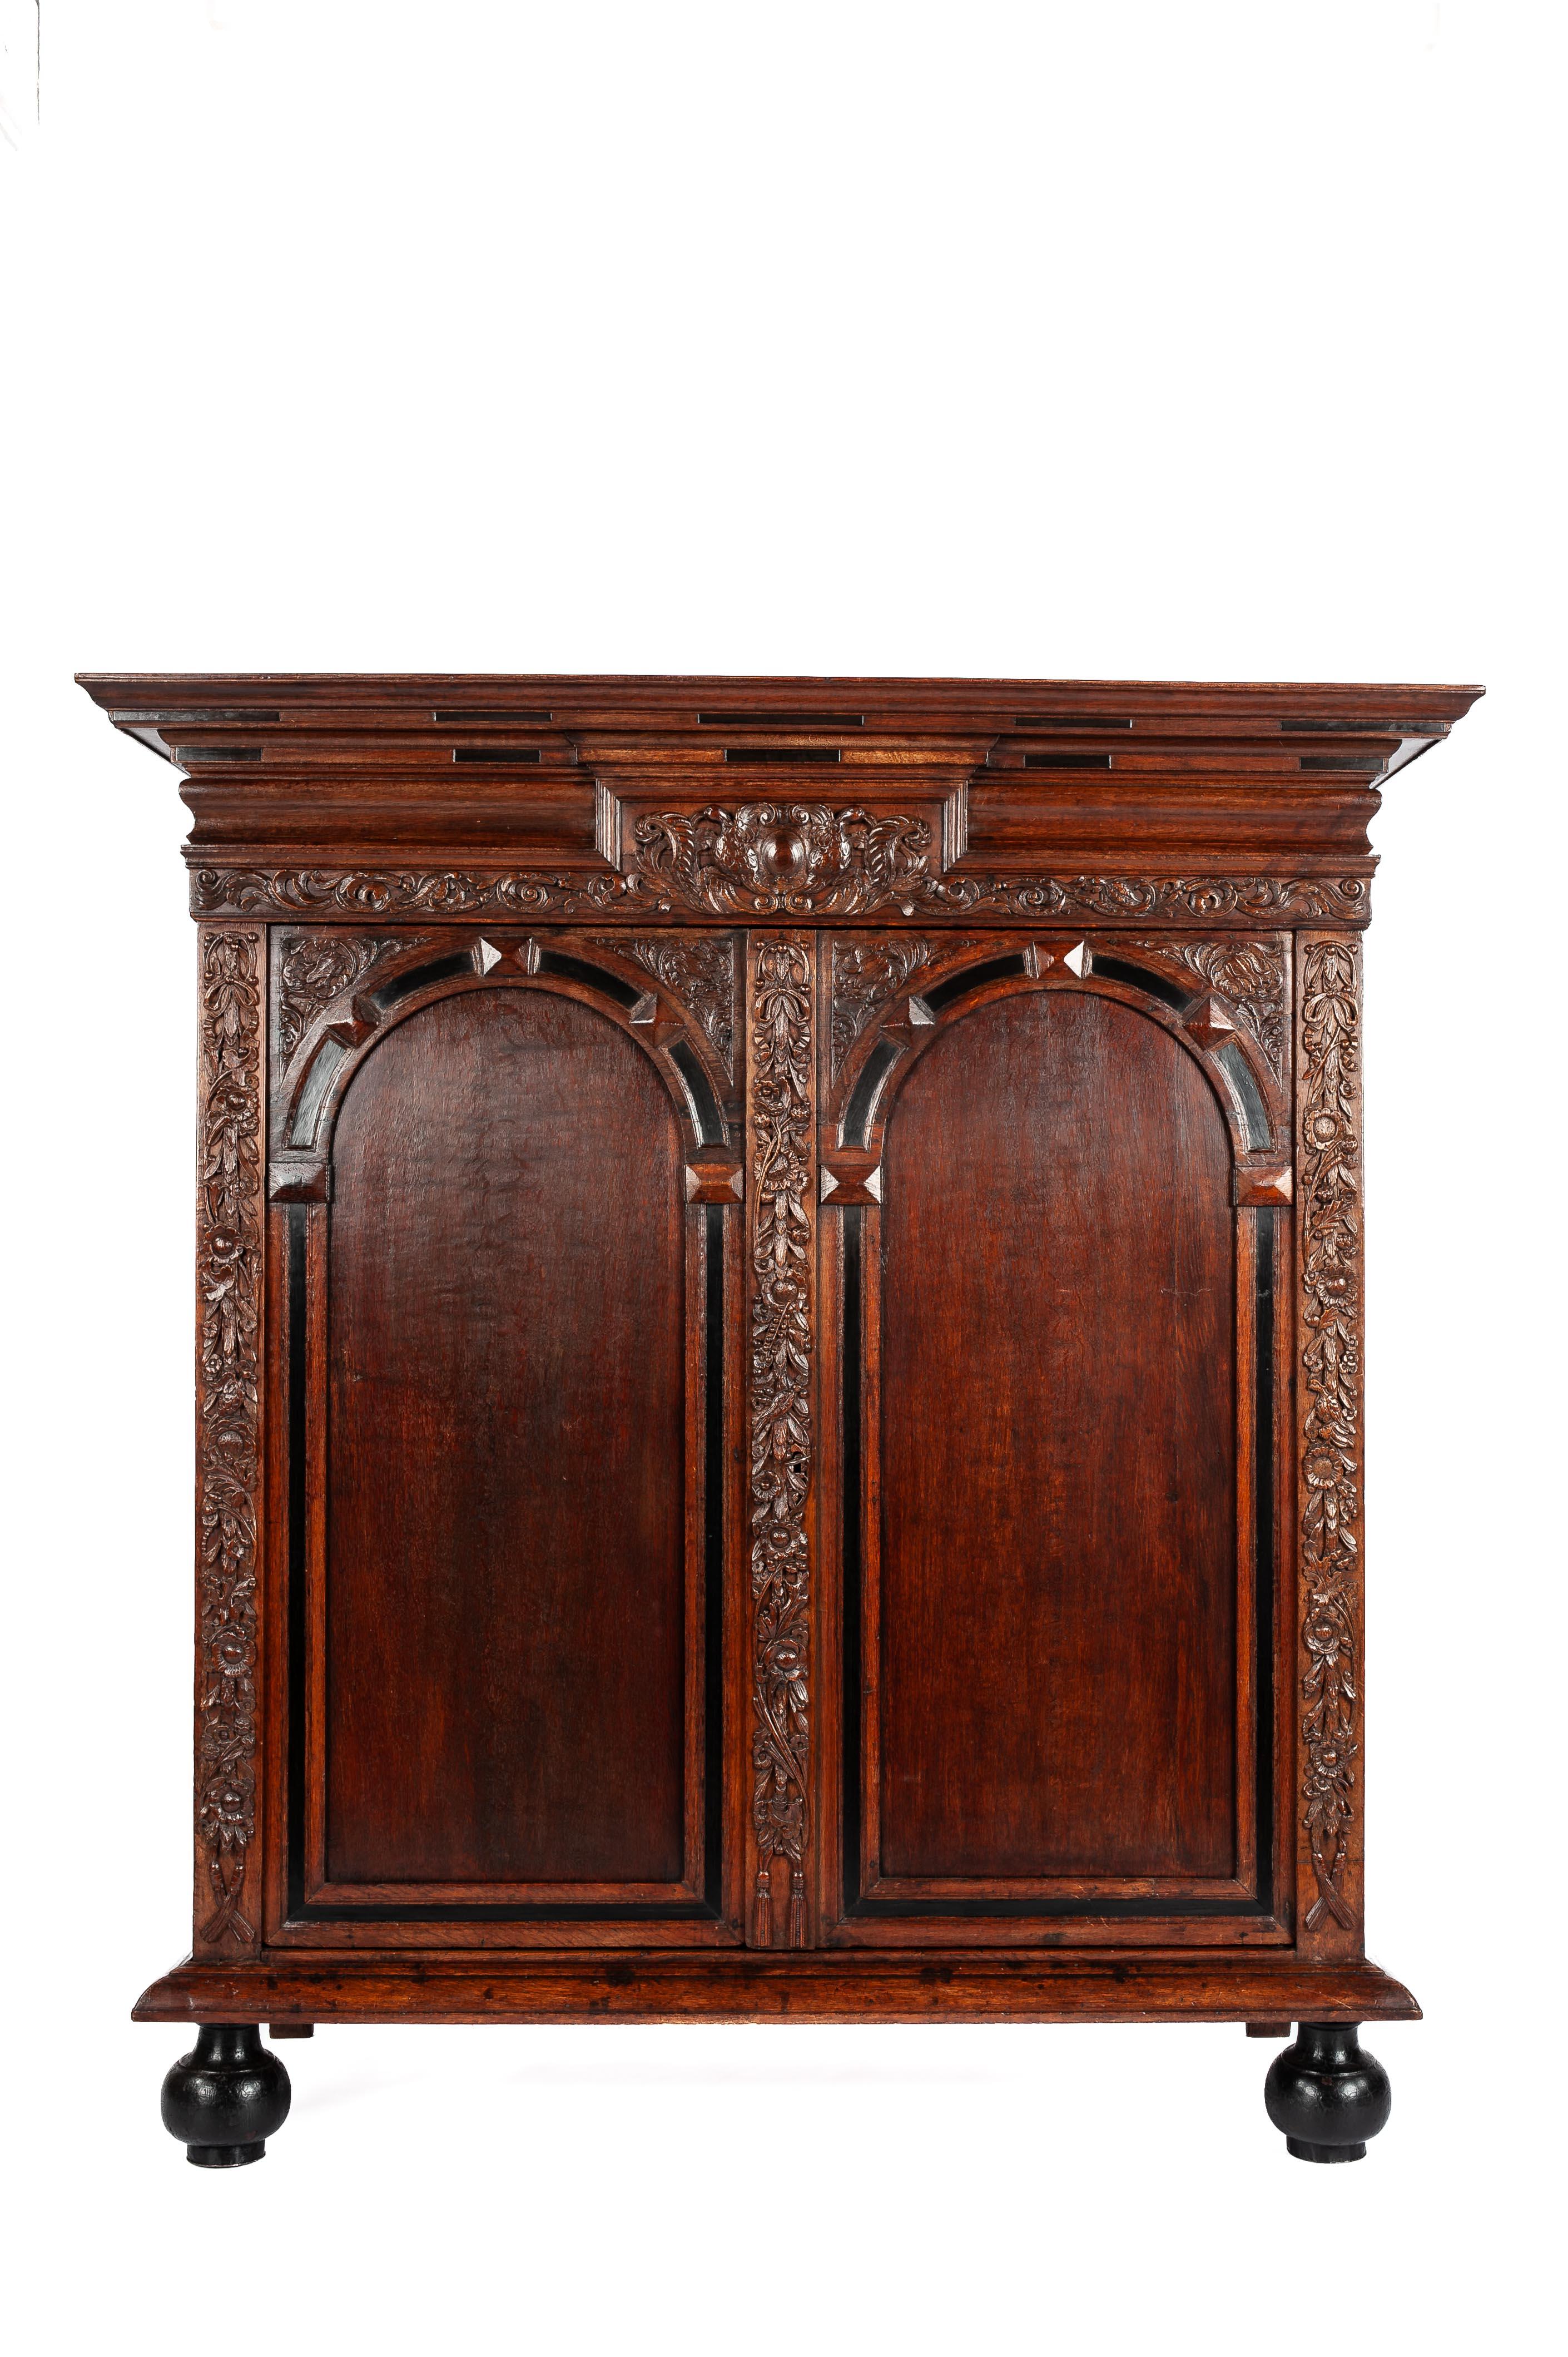 On offer here is a very rare Dutch cabinet made of the finest European summer oak in the tradition of the Dutch Renaissance during the “Dutch Golden Age” 
The cabinet was made in the Dutch province of Utrecht at the end of the 17th century, circa